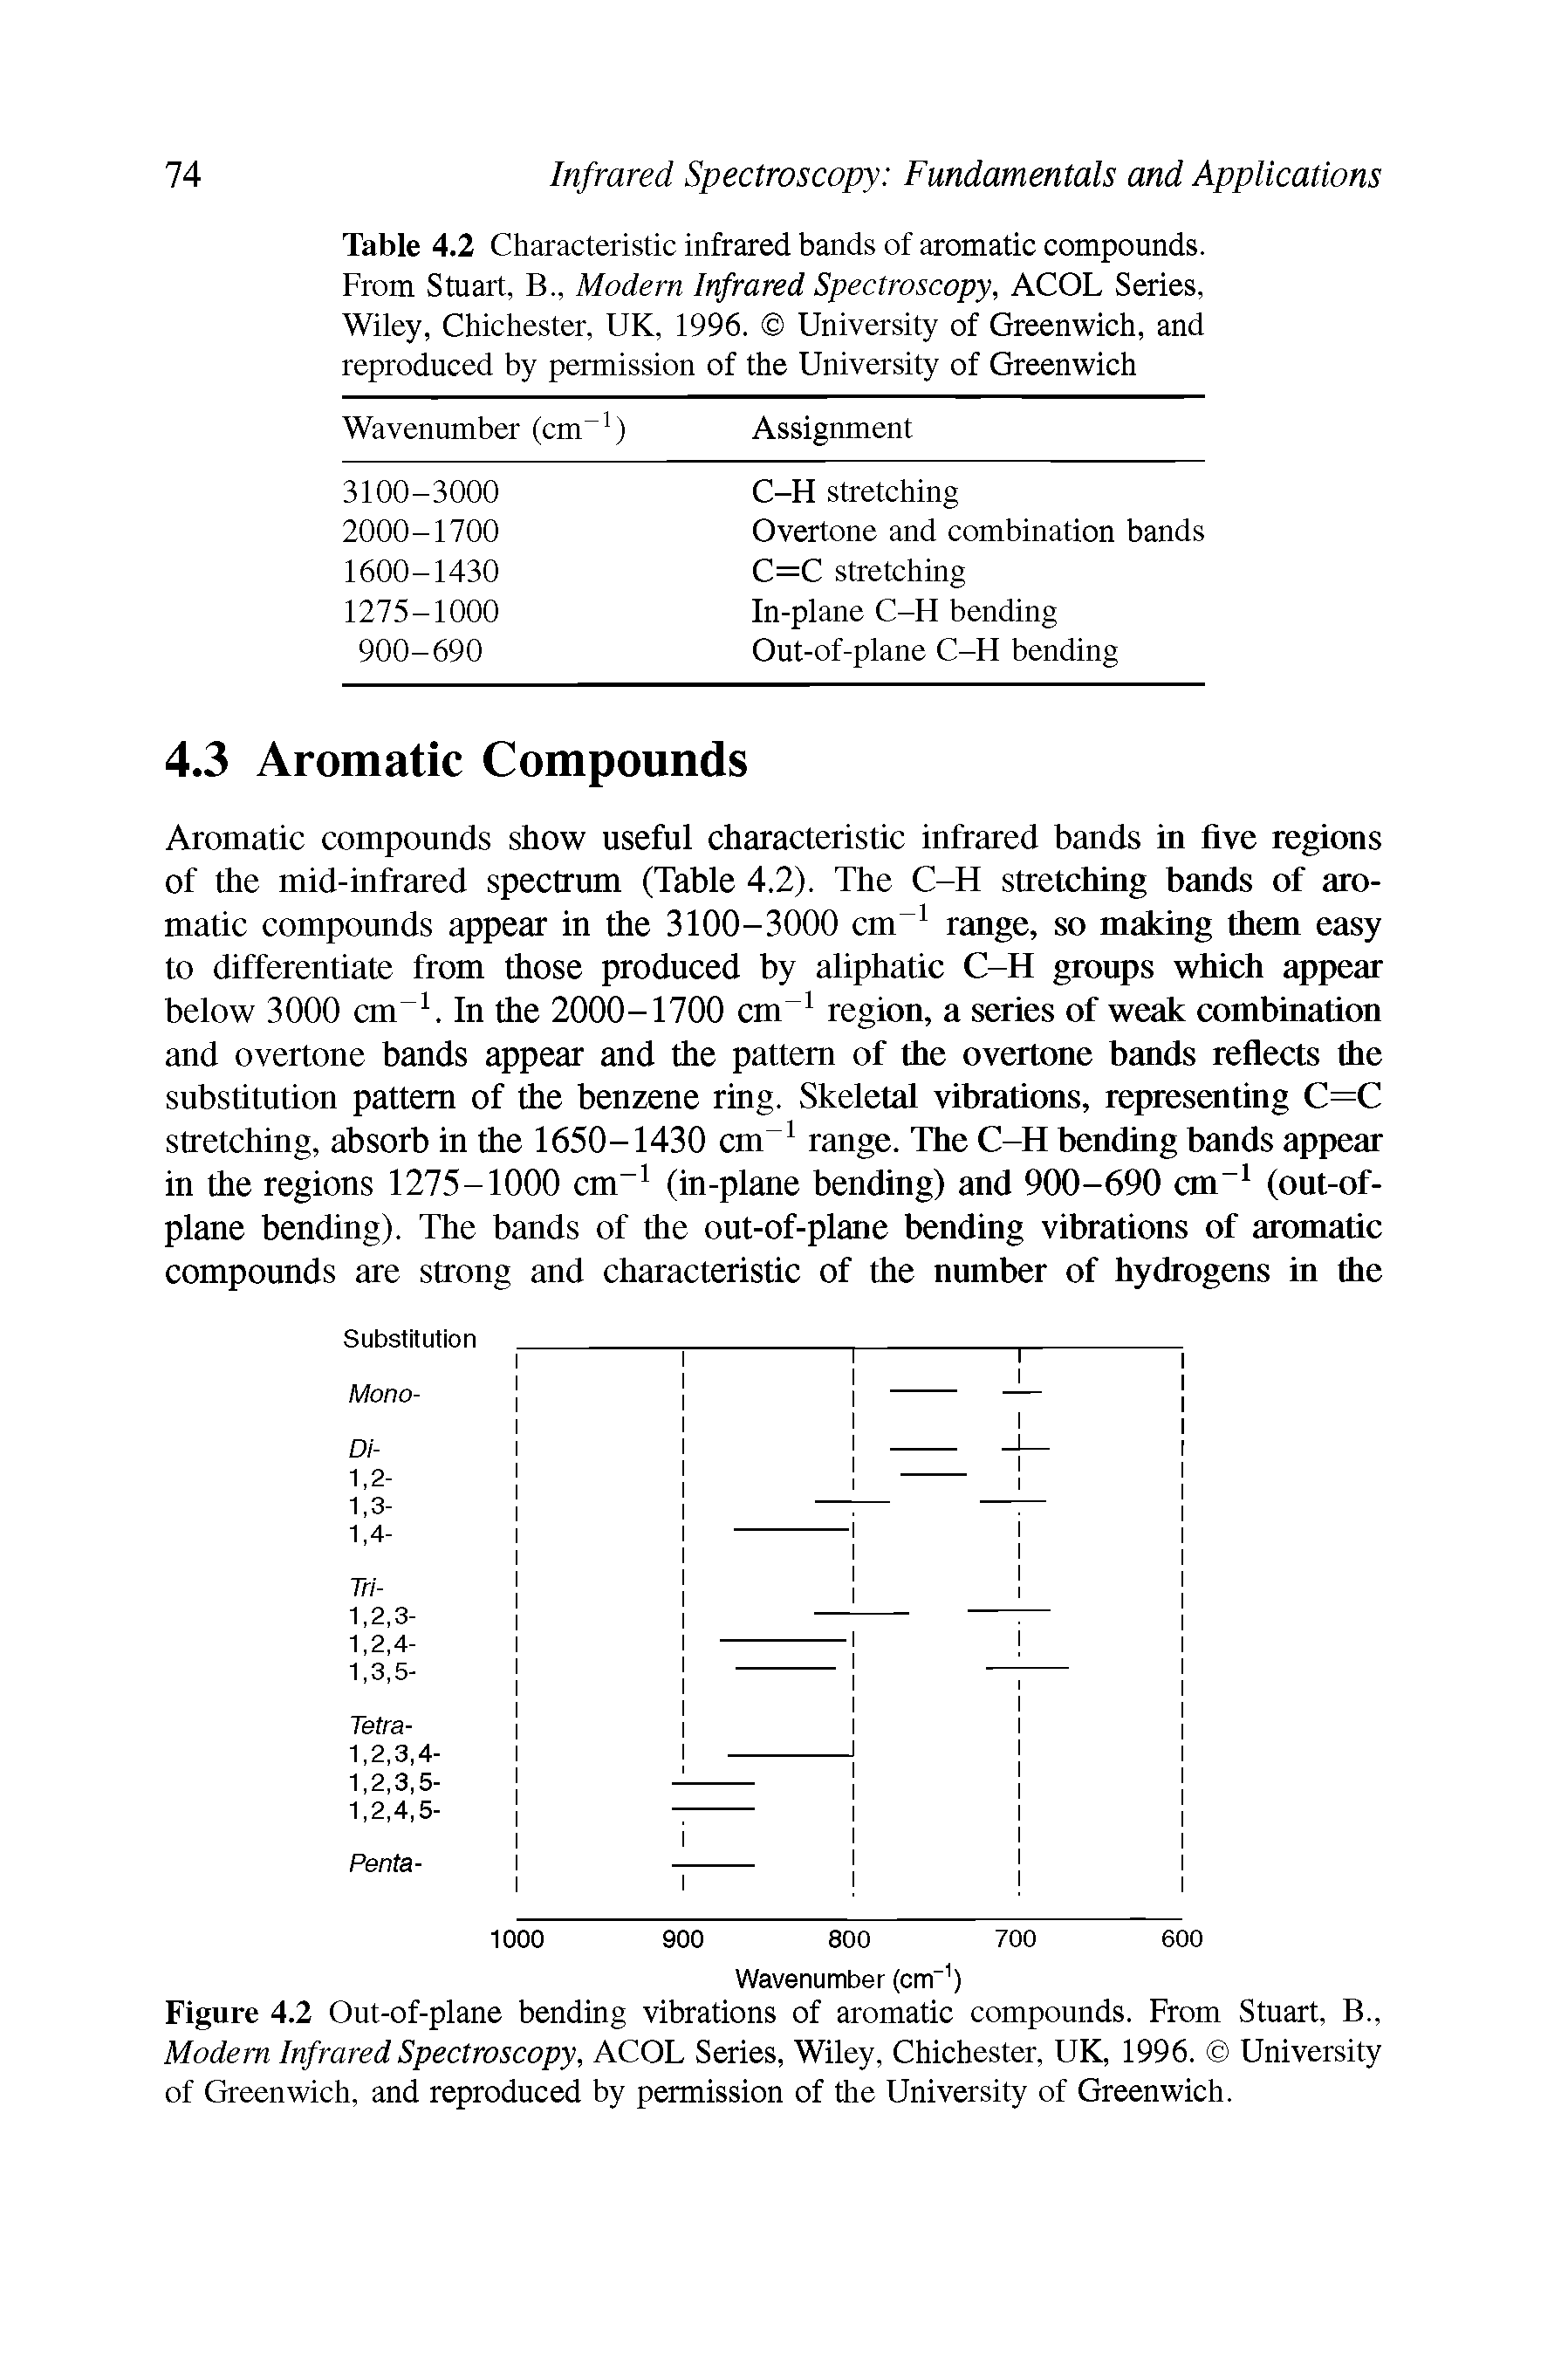 Table 4.2 Characteristic infrared bands of aromatic compounds. From Stuart, B., Modem Infrared Spectroscopy, ACOL Series, Wiley, Chichester, UK, 1996. University of Greenwich, and reproduced by permission of the University of Greenwich...